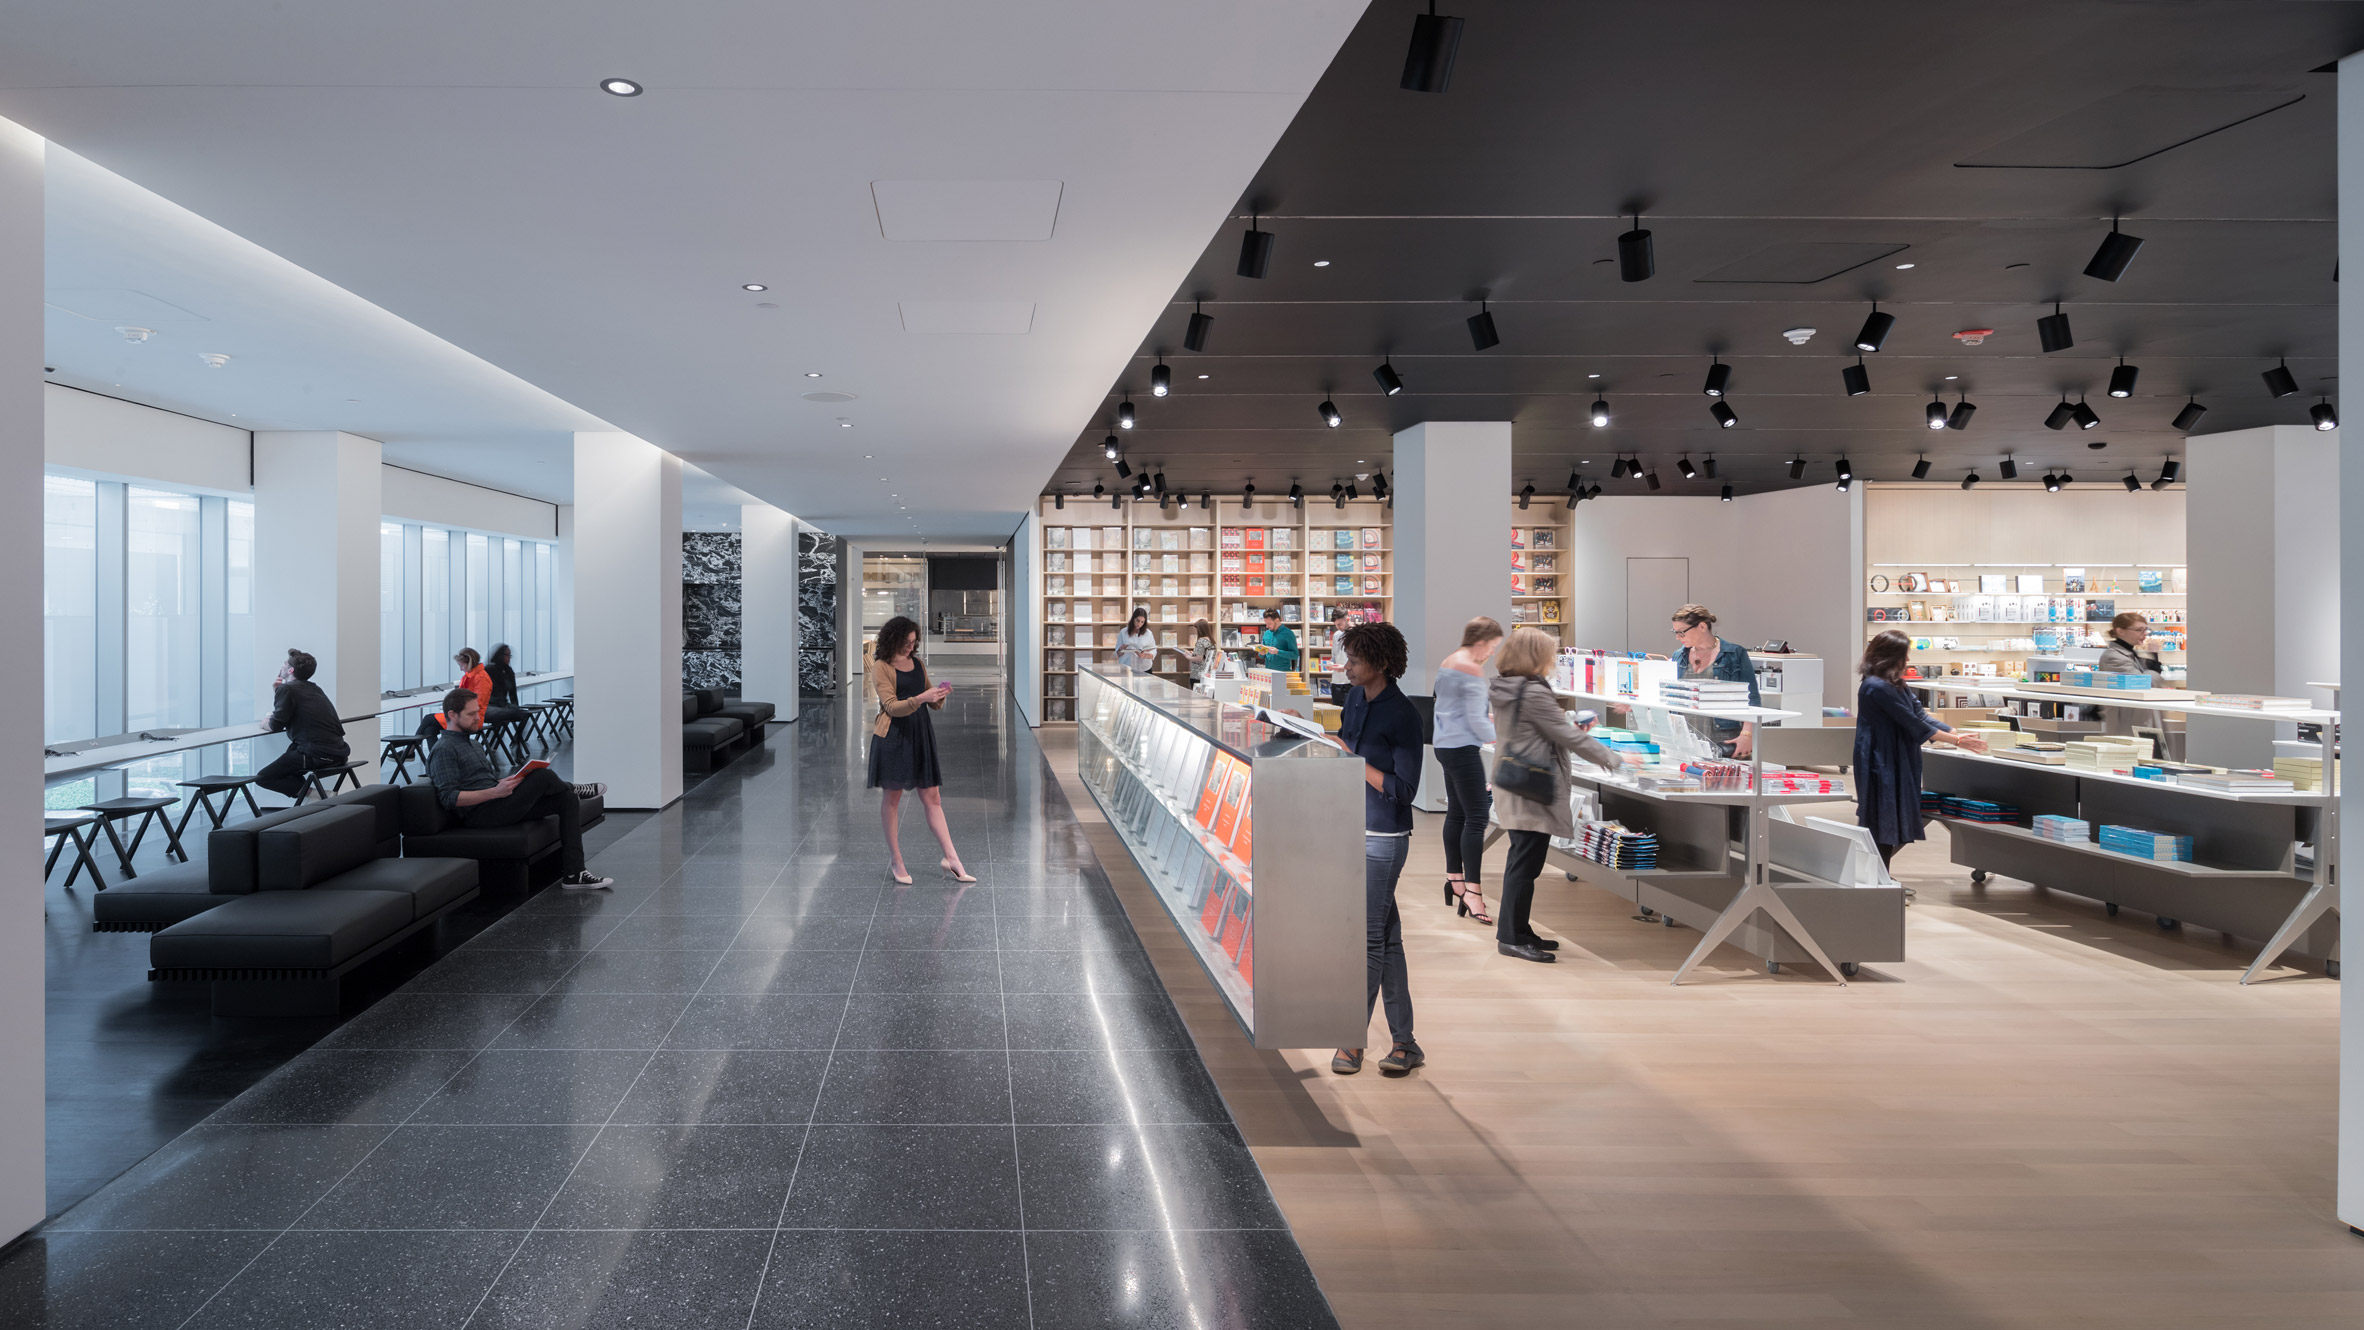 MoMA unveils first phase major overhaul by Diller Scofidio + Renfro